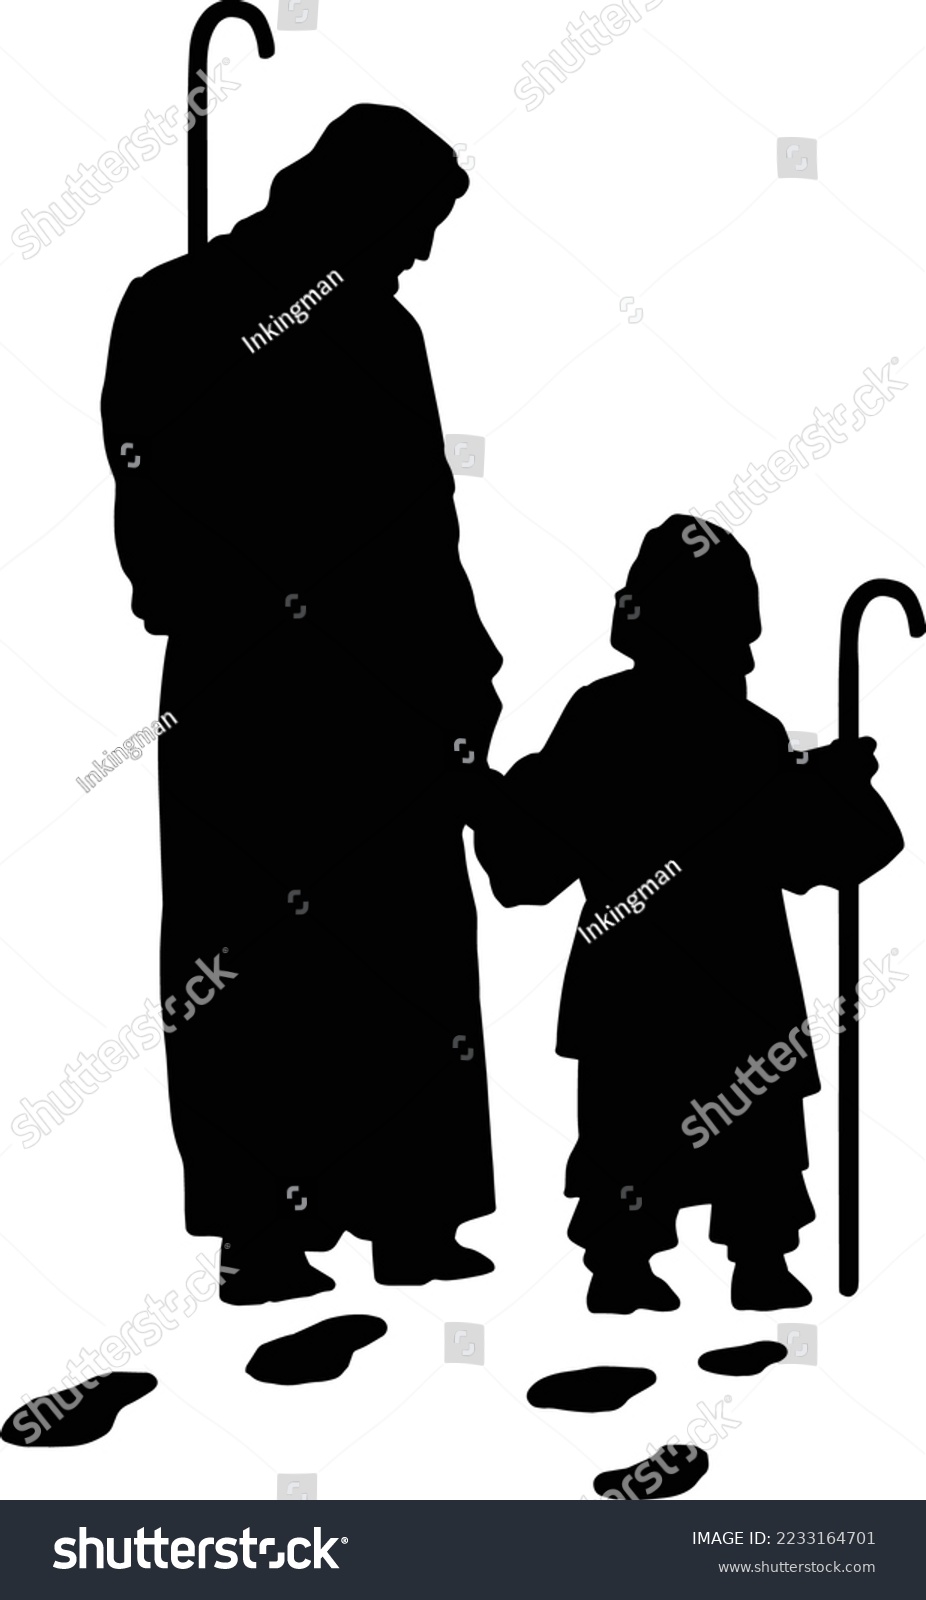 SVG of Jesus Shepherd Walking with kid svg, vector, black and white, background, silhouette svg